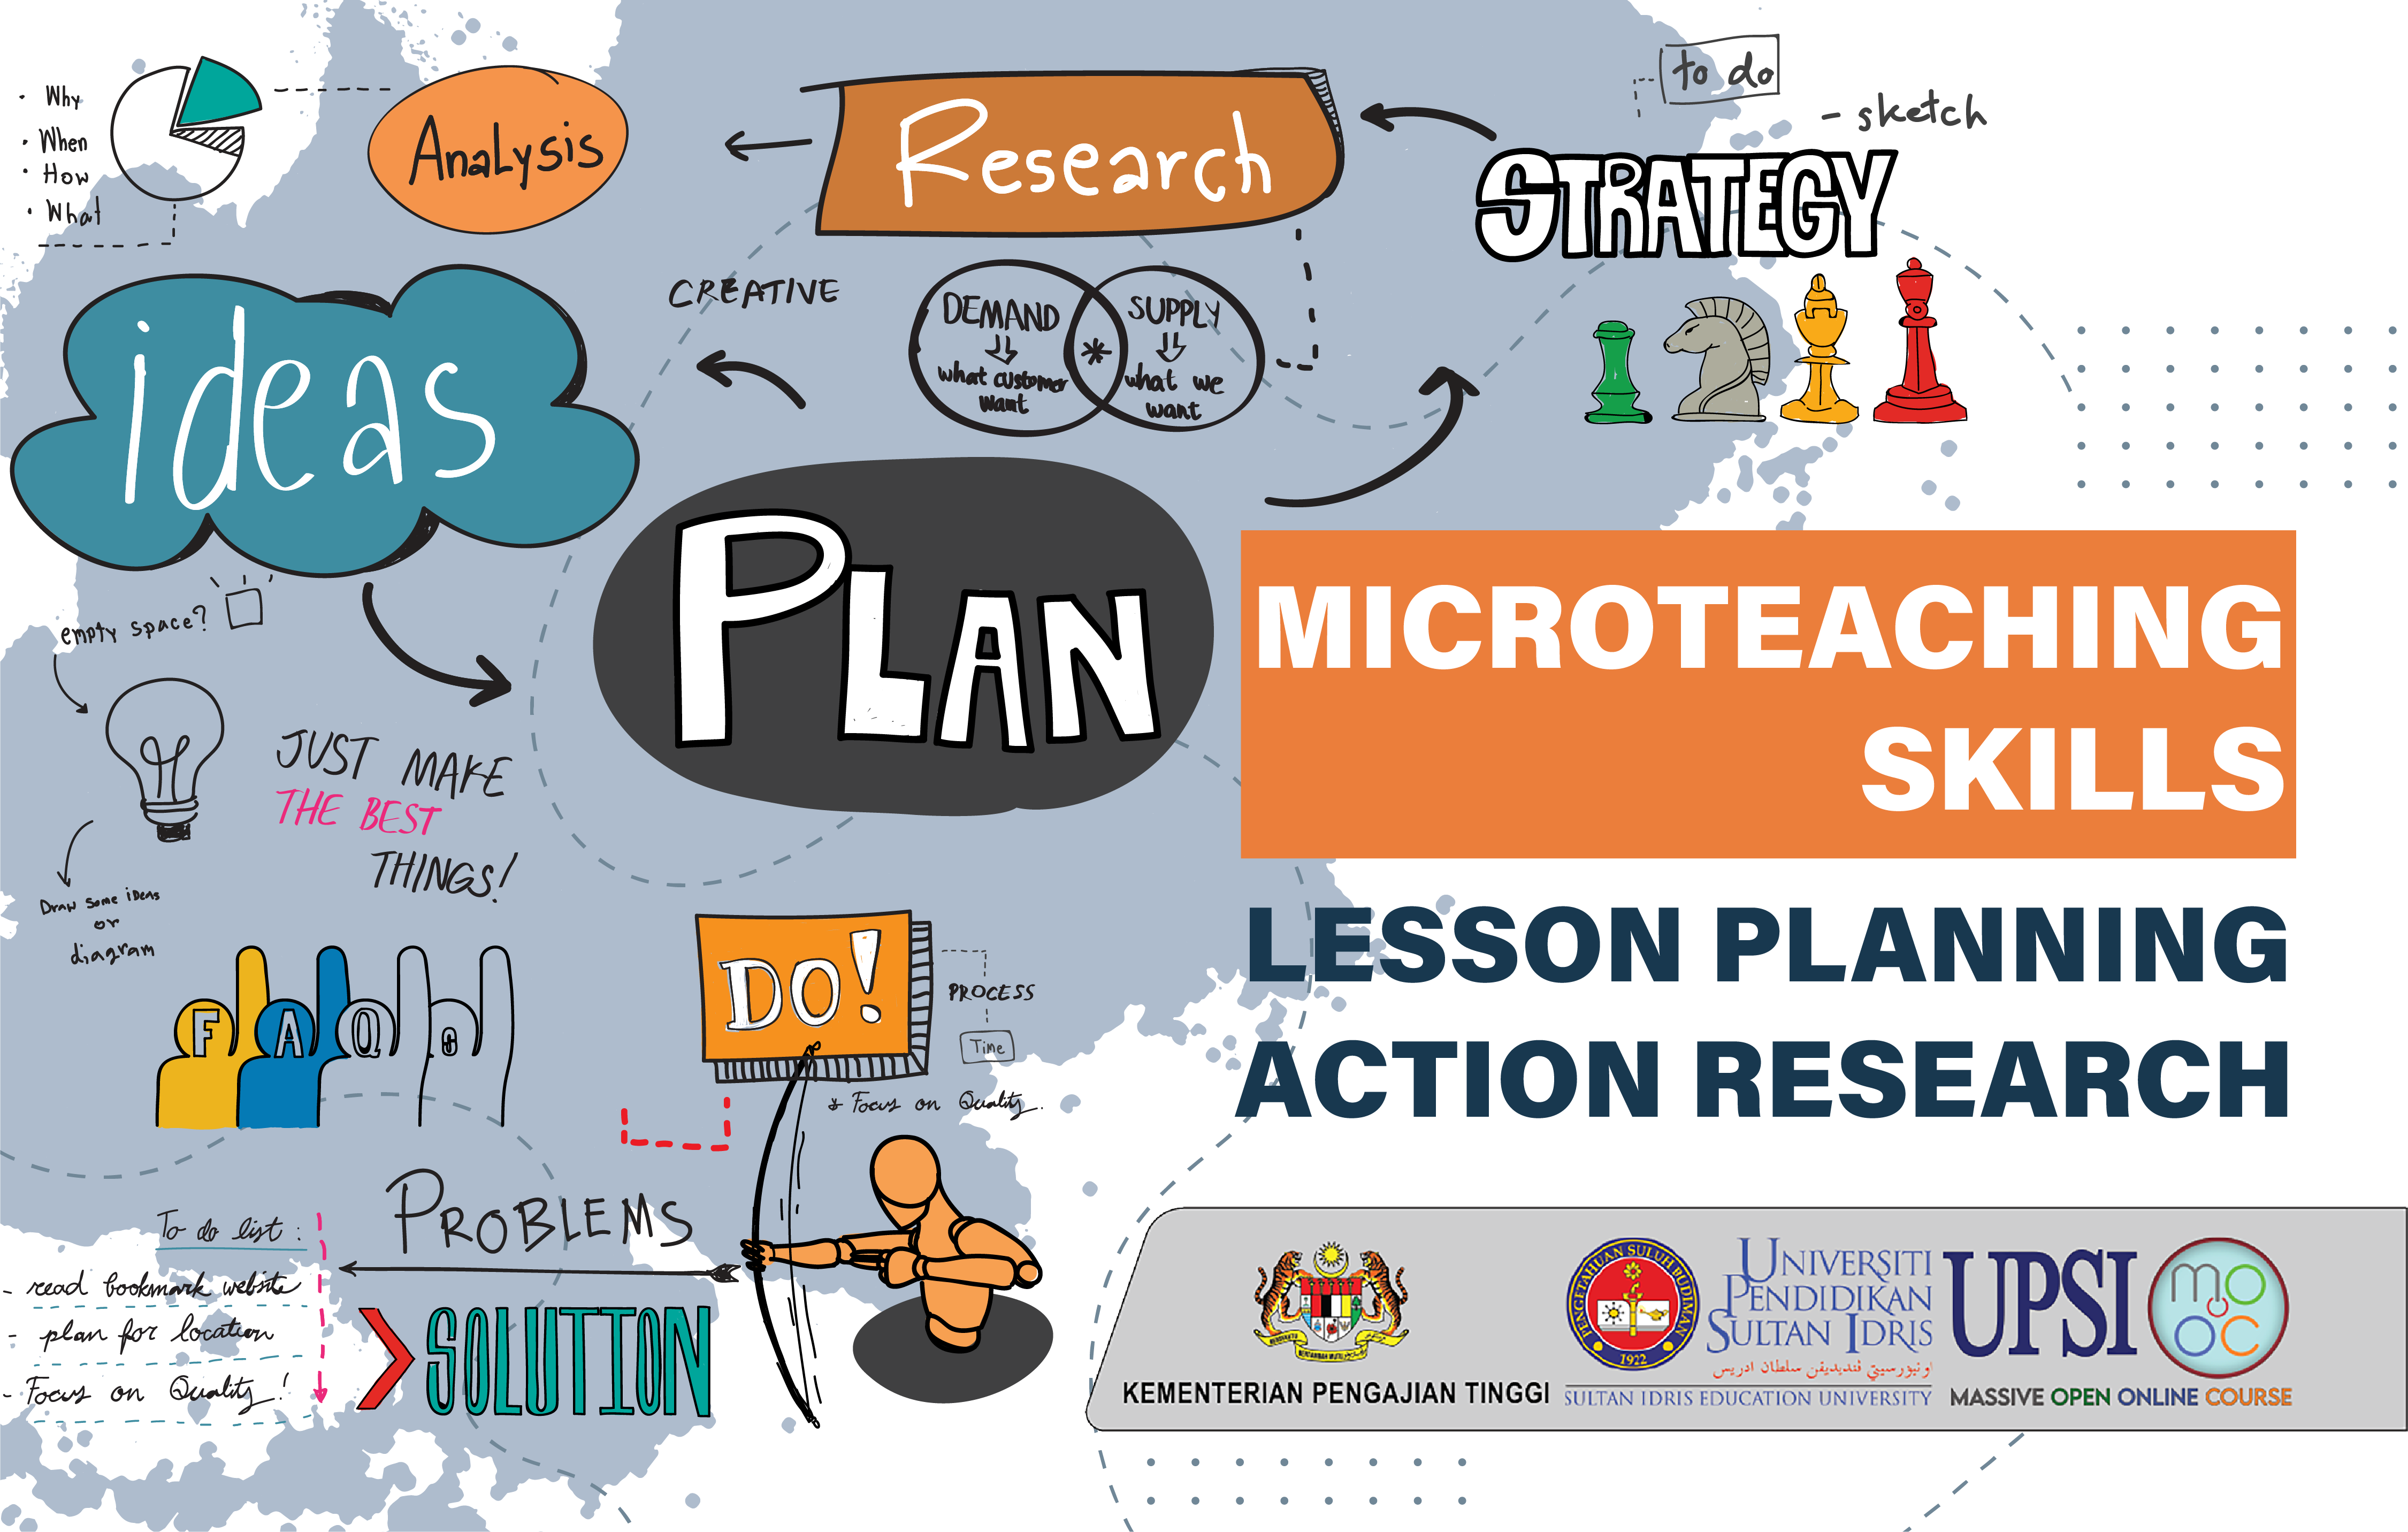 Microteaching Skills, Lesson Planning, and Action Research